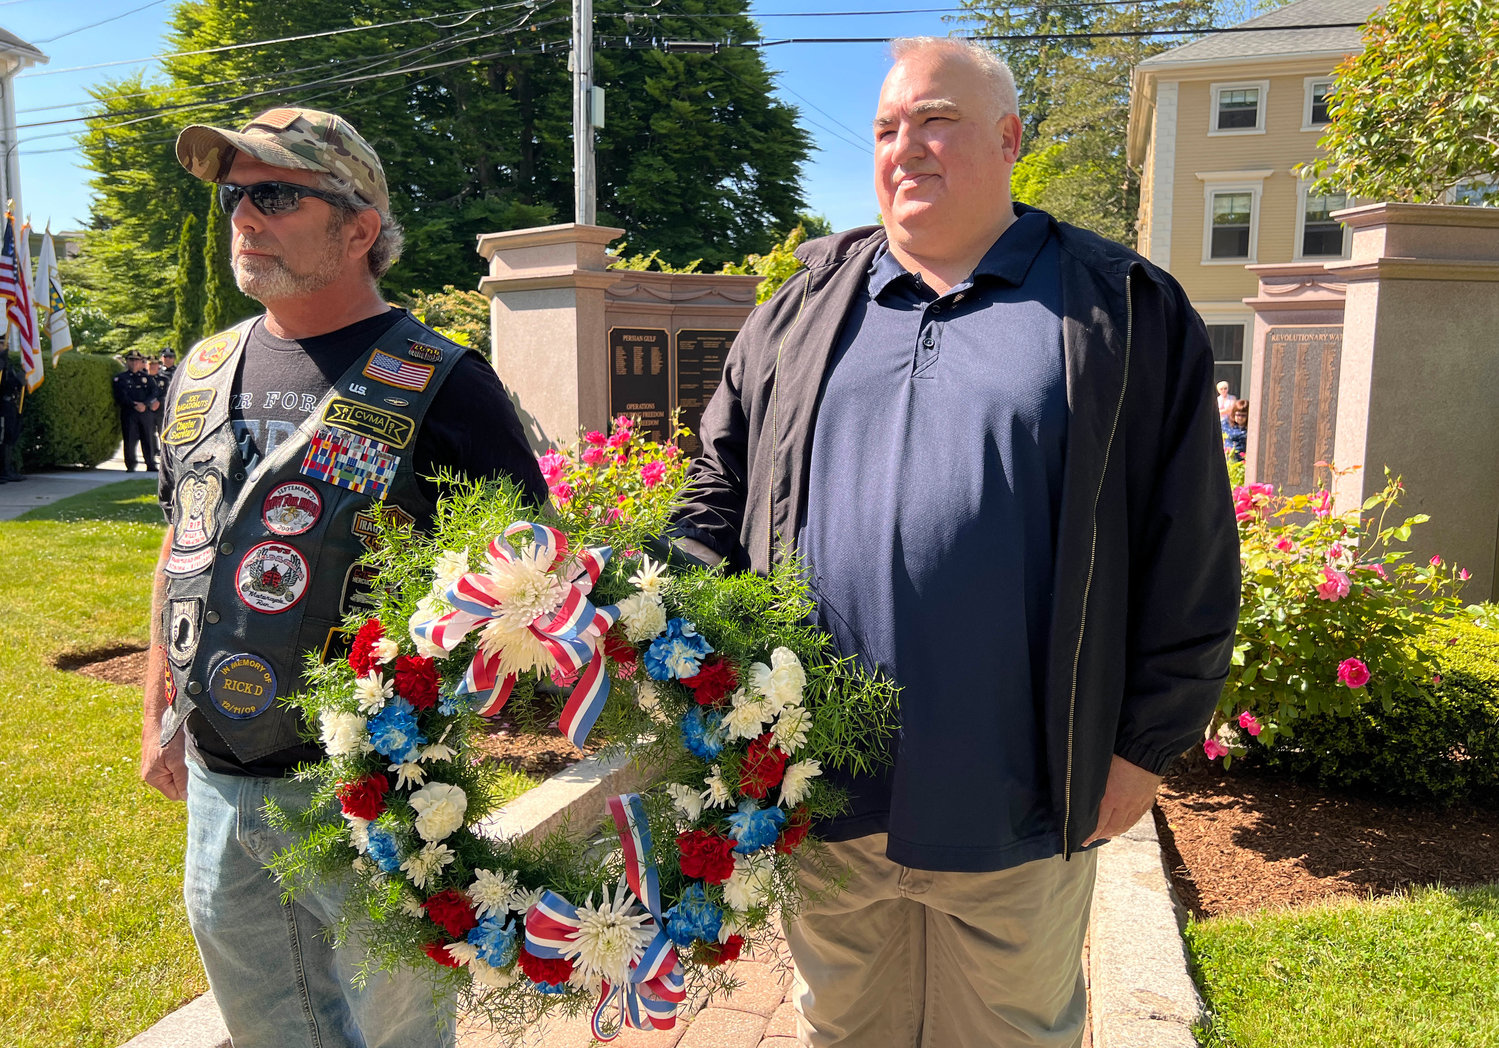 Warren shows out to honor the fallen on Memorial Day weekend